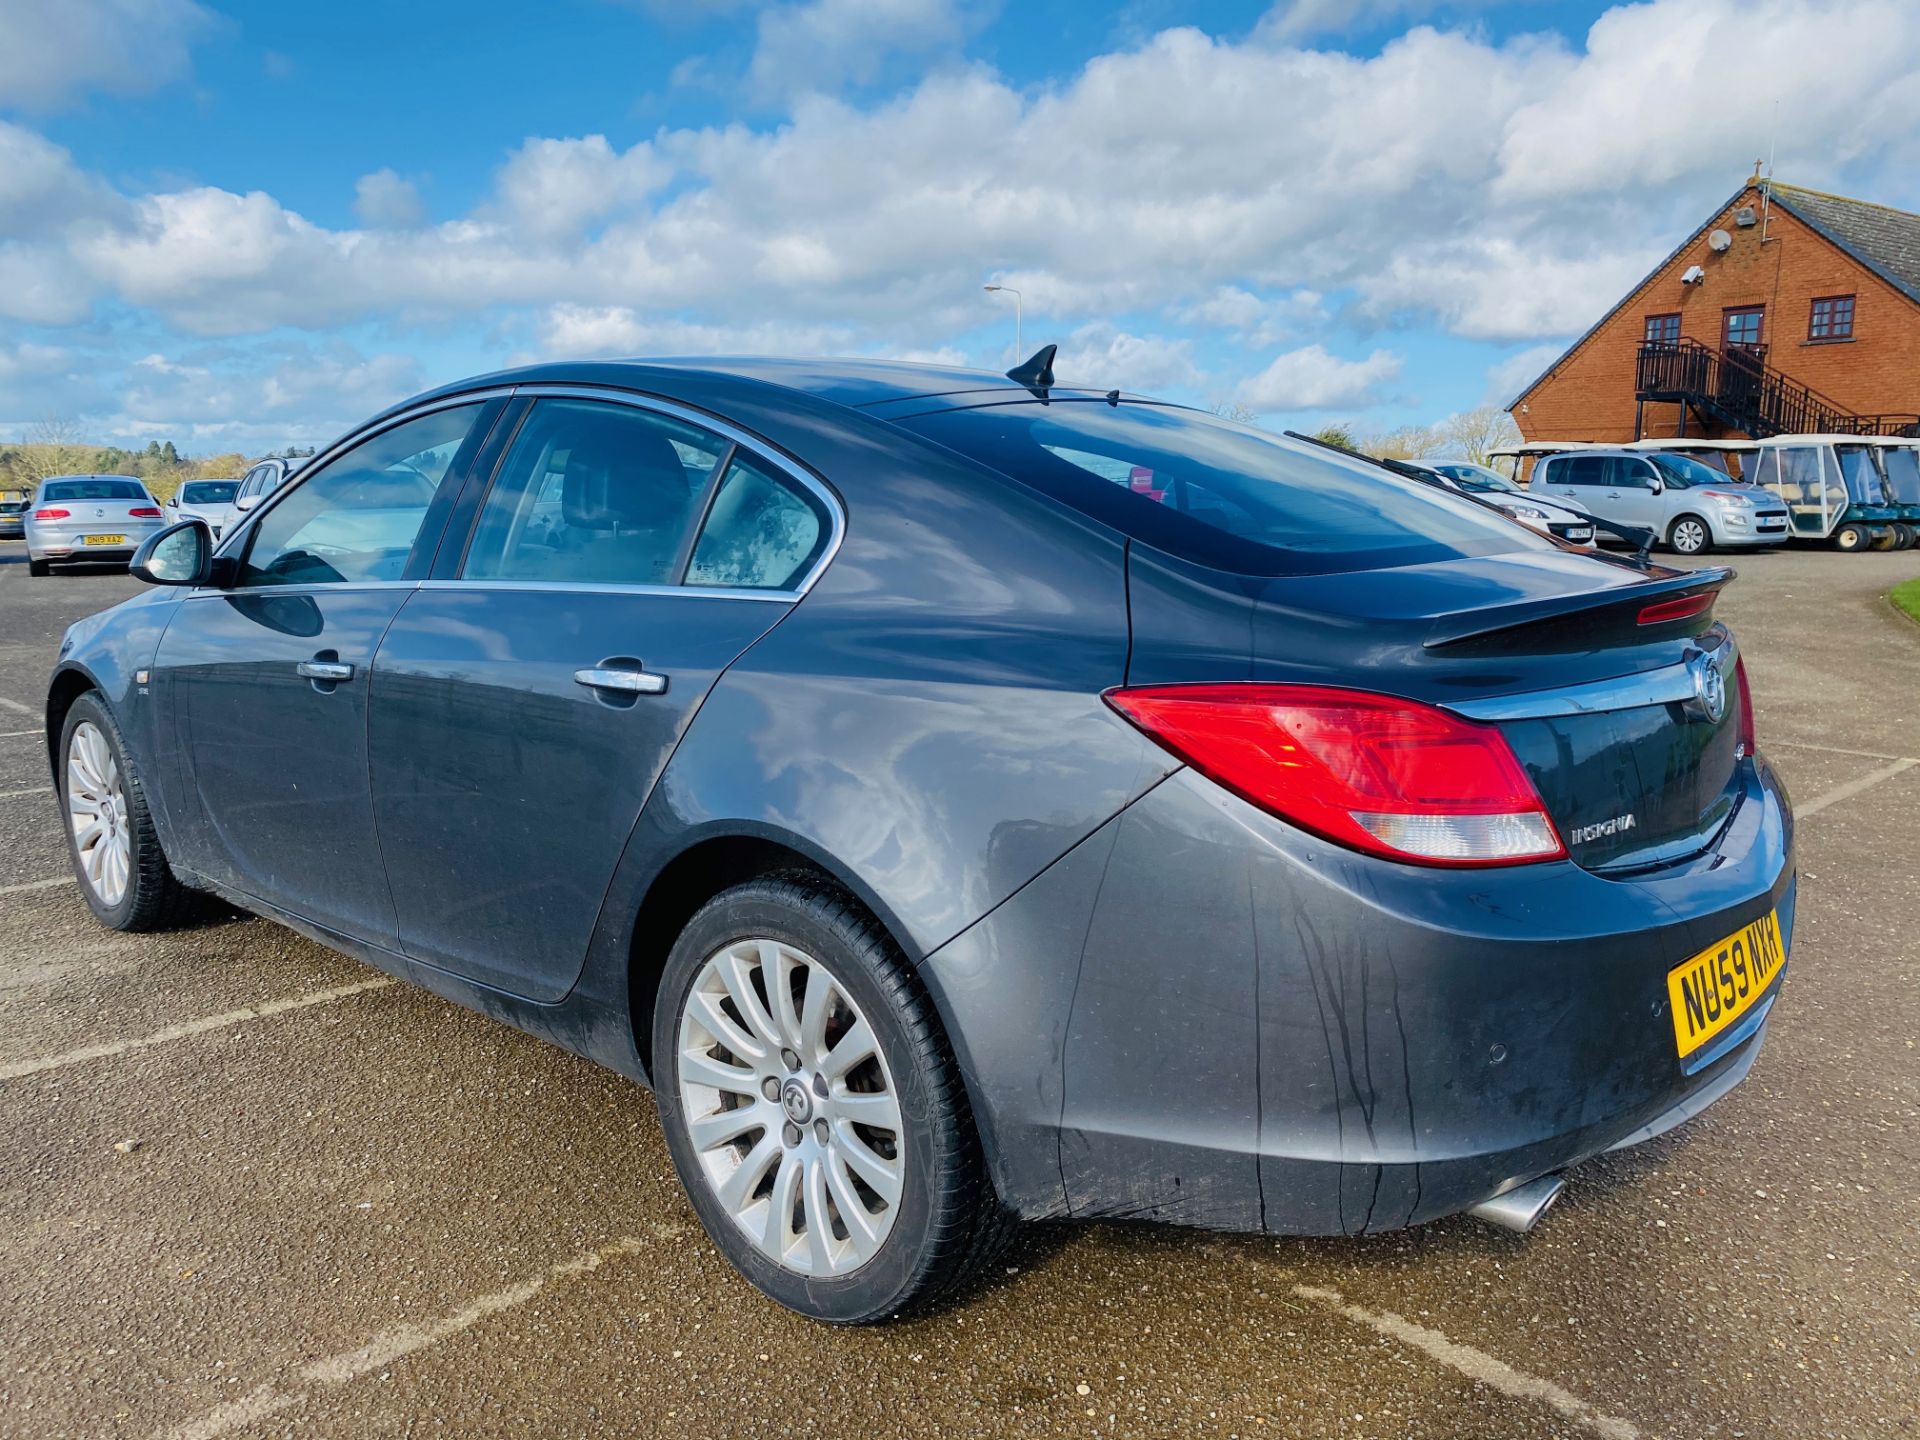 (ON SALE) VAUXHALL INSIGNIA 2.0CDTI "SE" 5 DOOR HATCHBACK - LEATHER - AIR CON - LOW MILES - NO VAT - Image 6 of 30